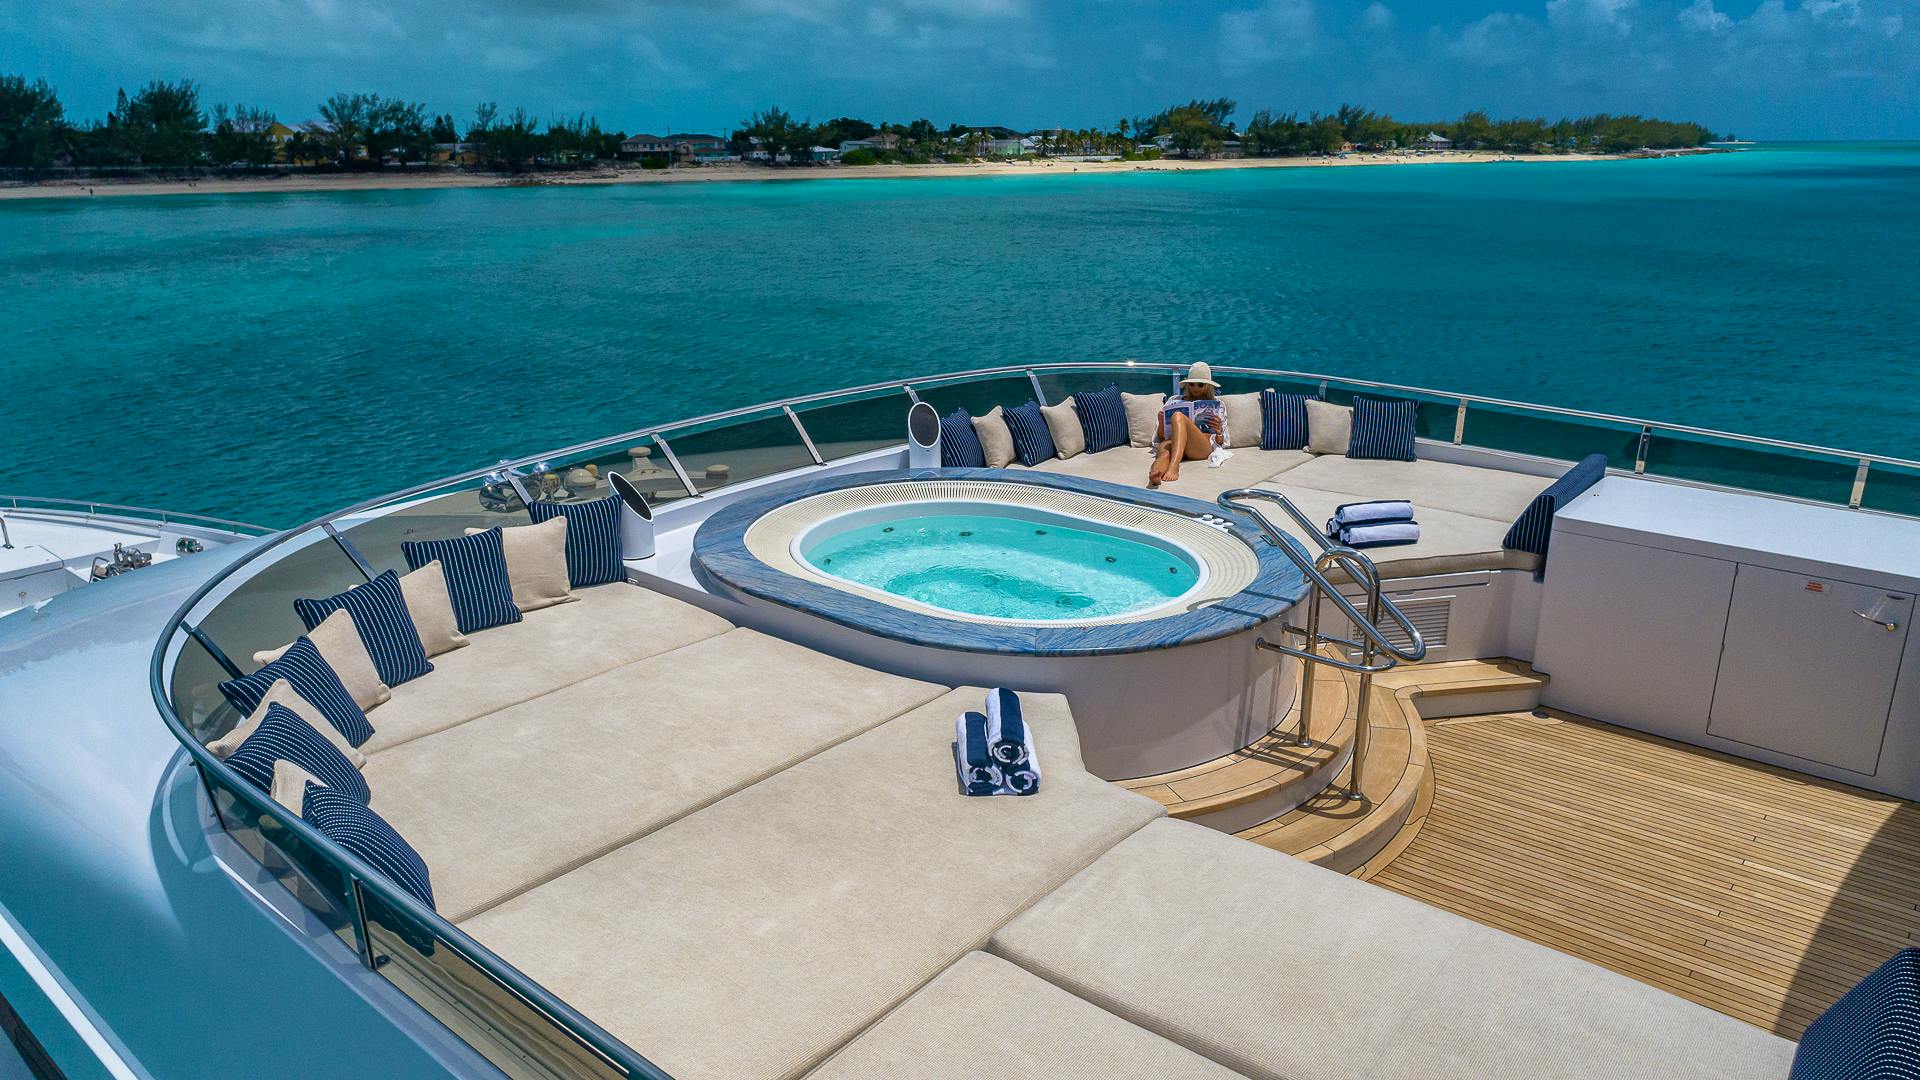 Seasonal Rates for CASINO ROYALE Private Luxury Yacht For Charter